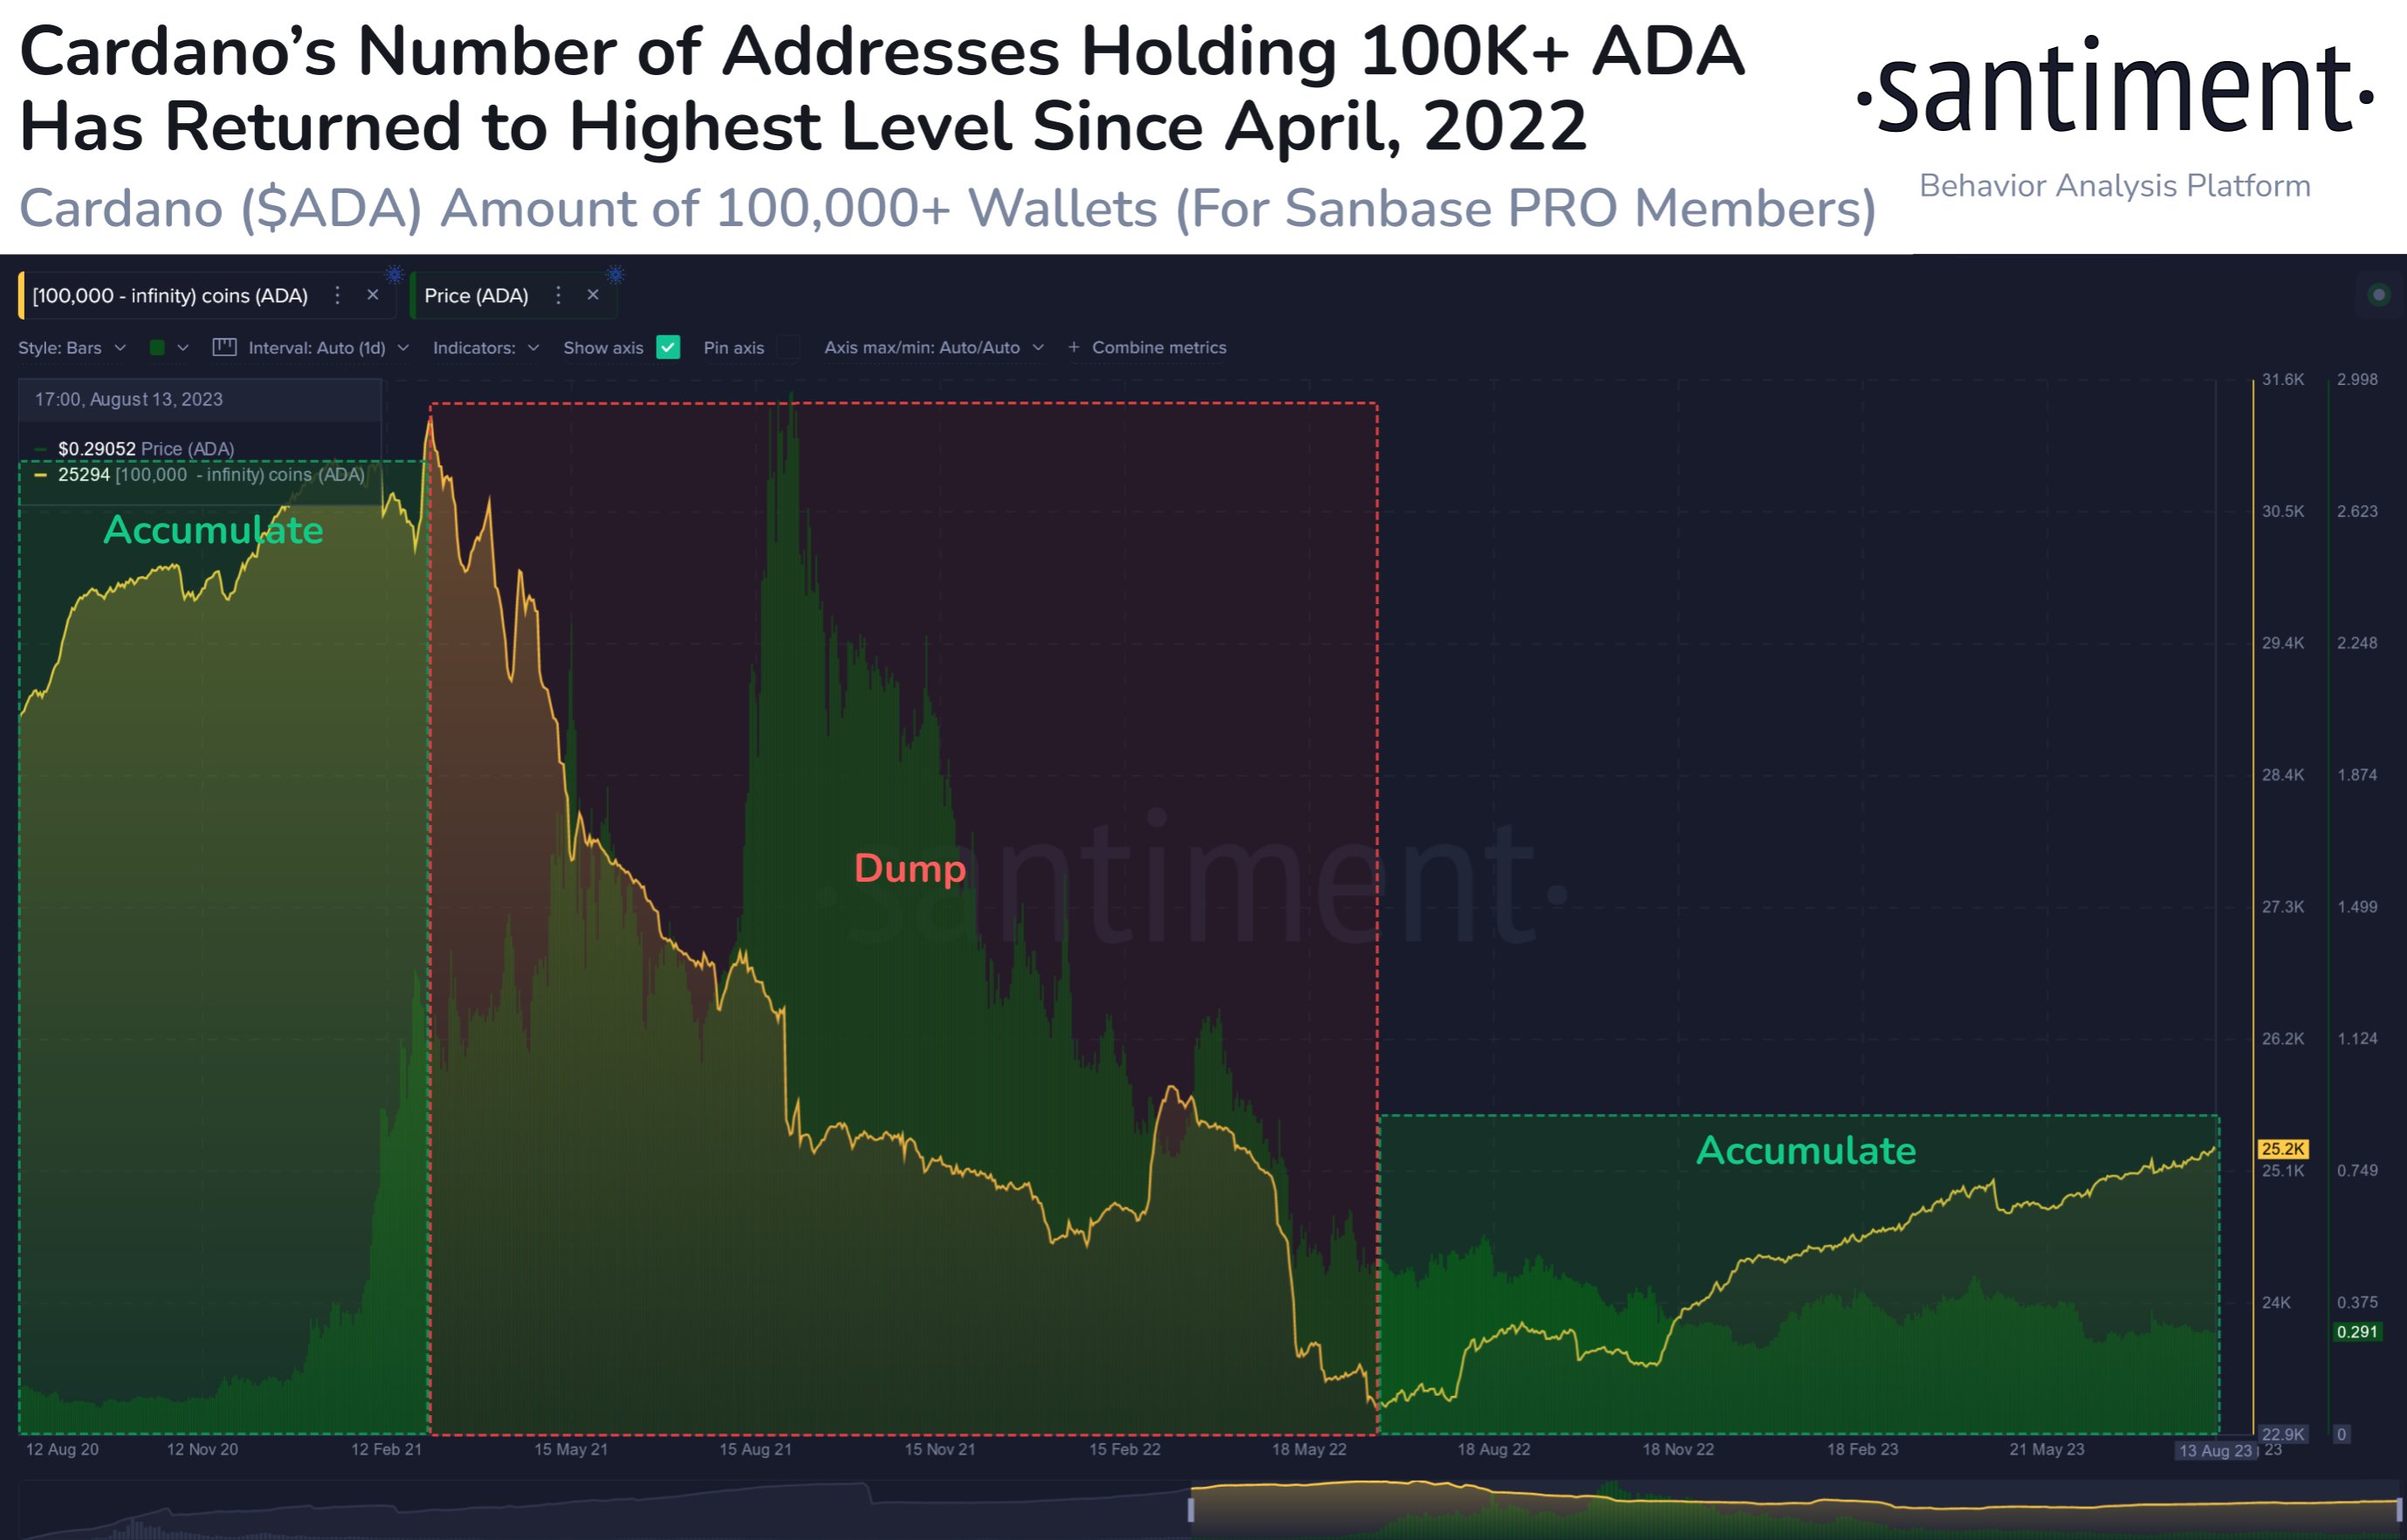 Cardano accumulation between May and August 2023